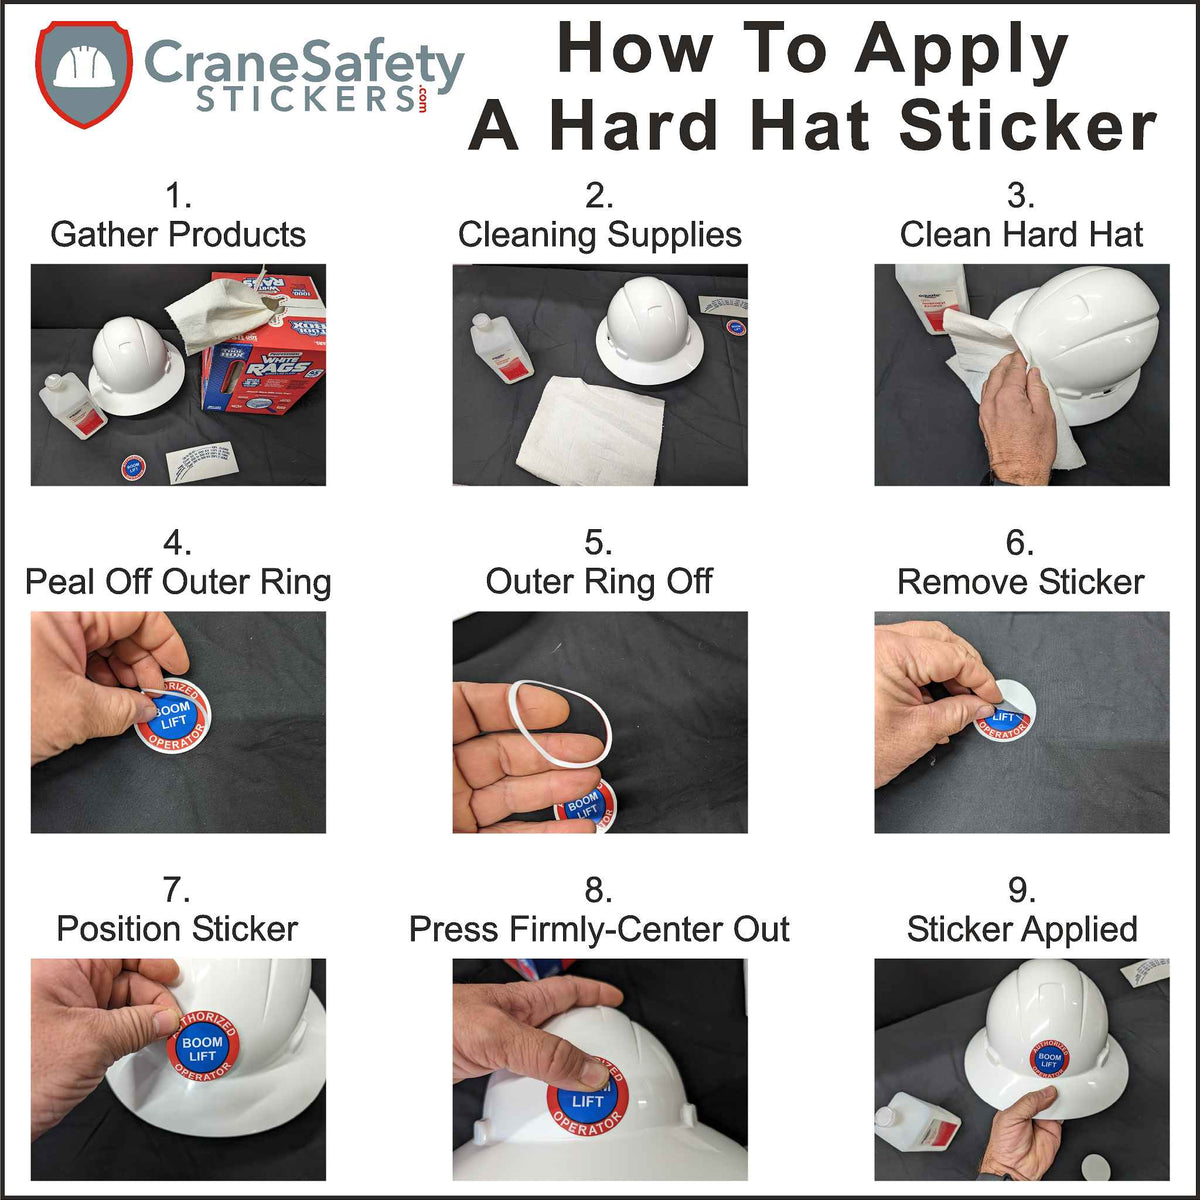 How to Apply Our Work Safely Hard Hat Sticker to a hard hat.